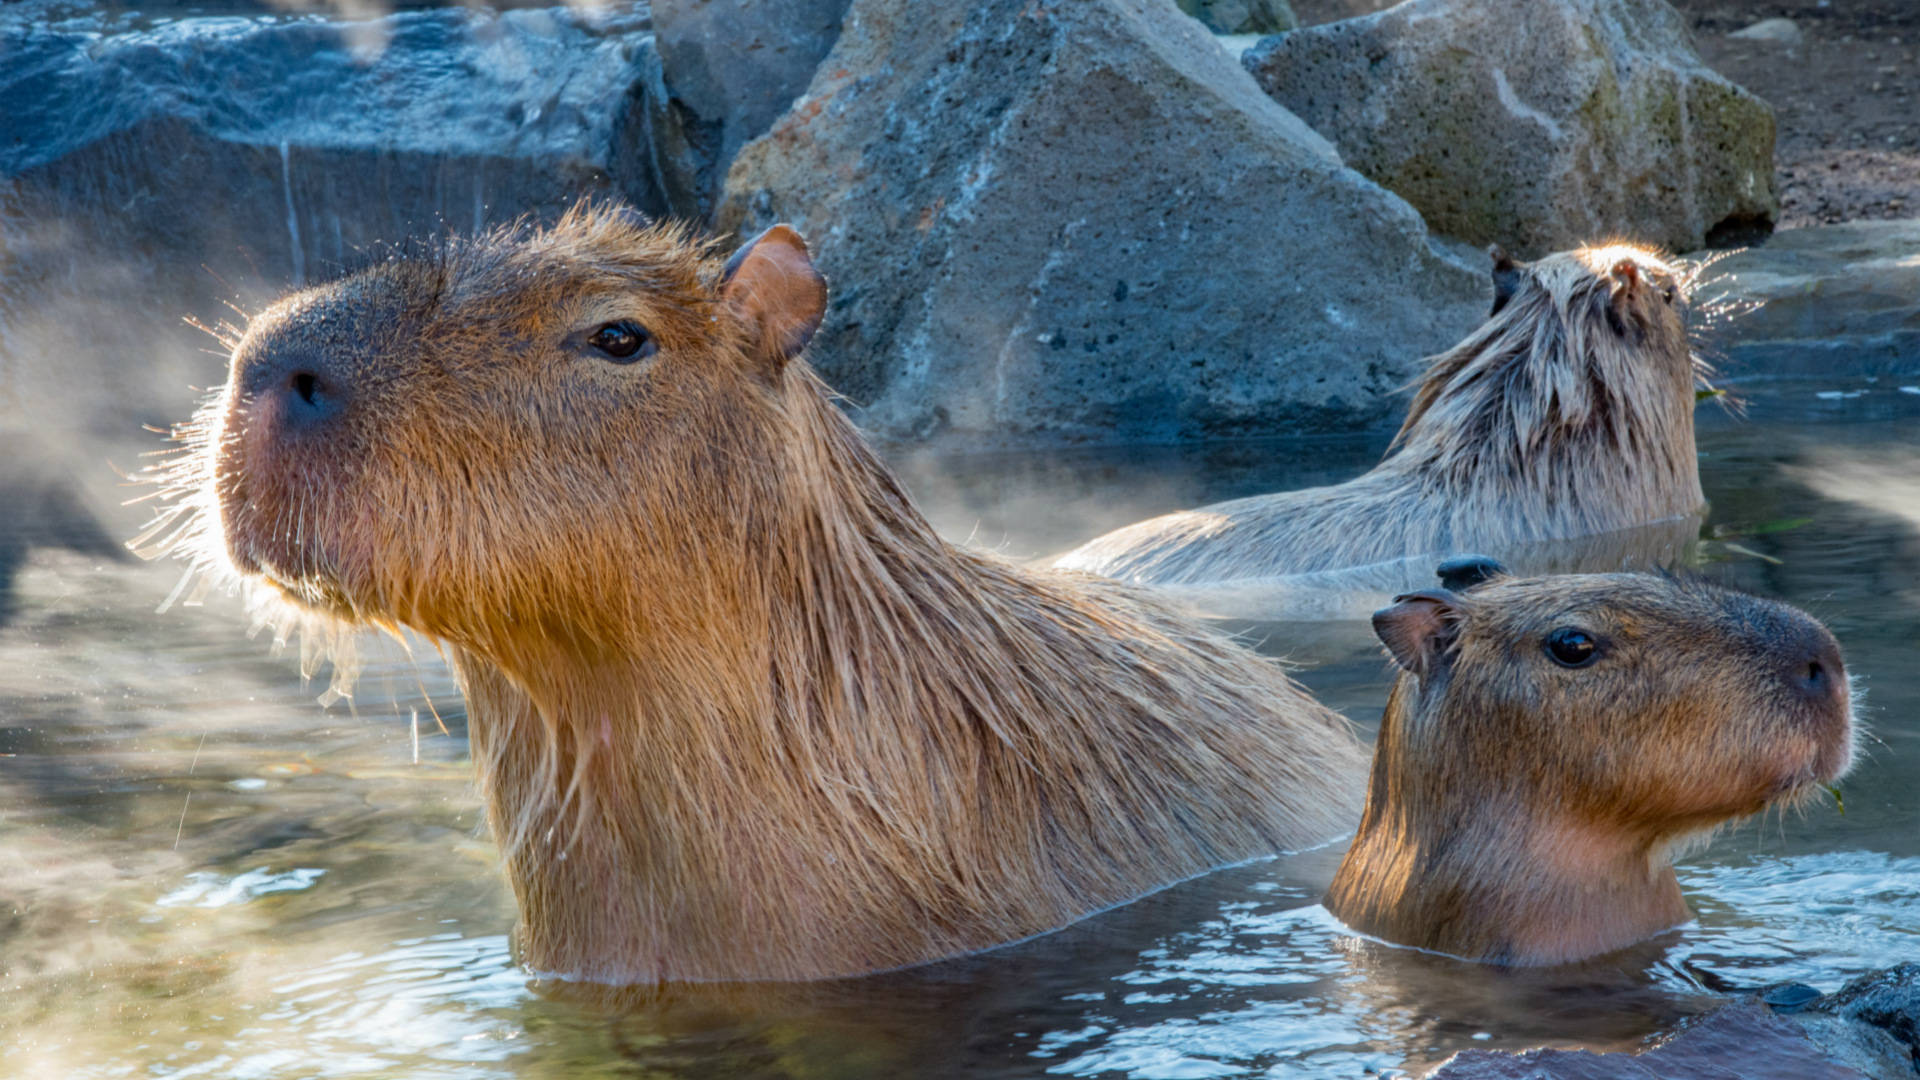 Soaked Capybara In The Water